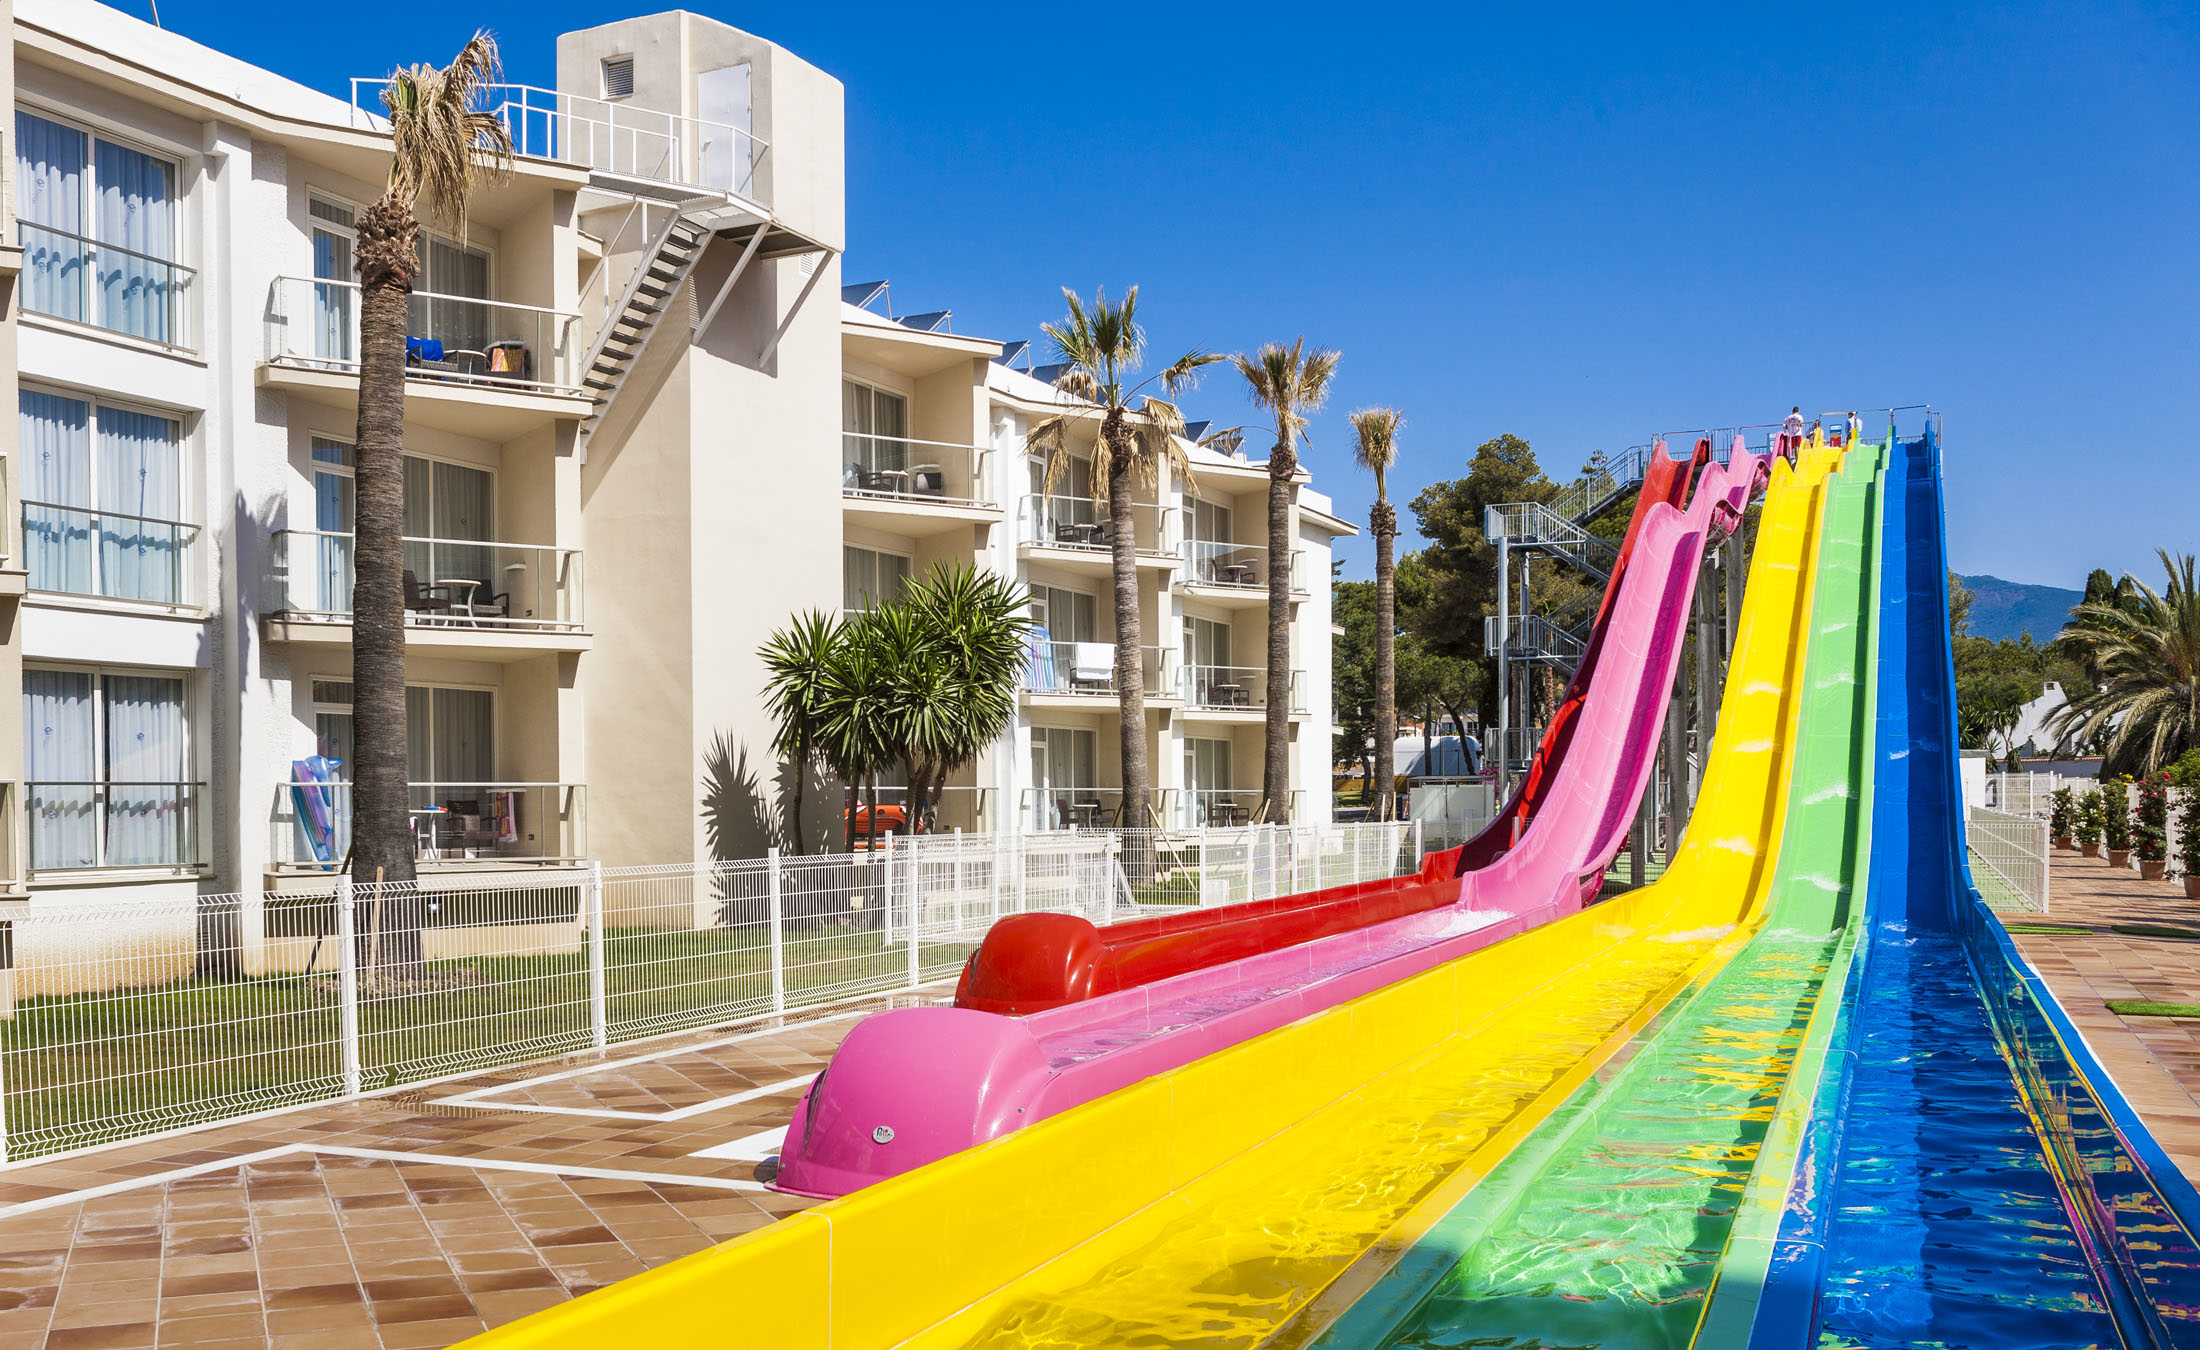 What You Need to Know before Add a Water Park to Hotel?